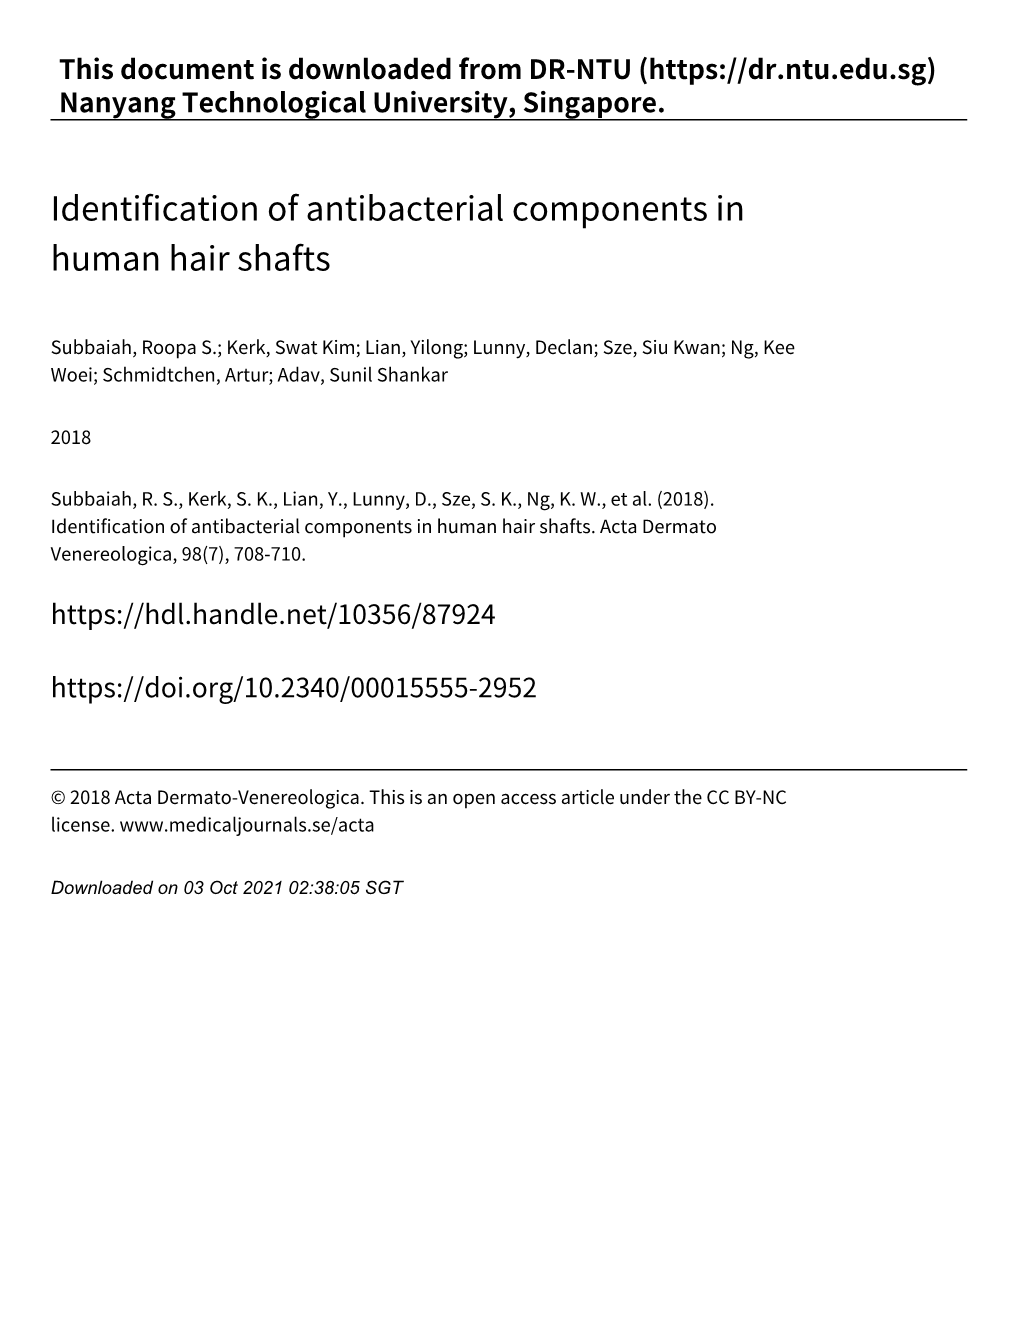 Identification of Antibacterial Components in Human Hair Shafts